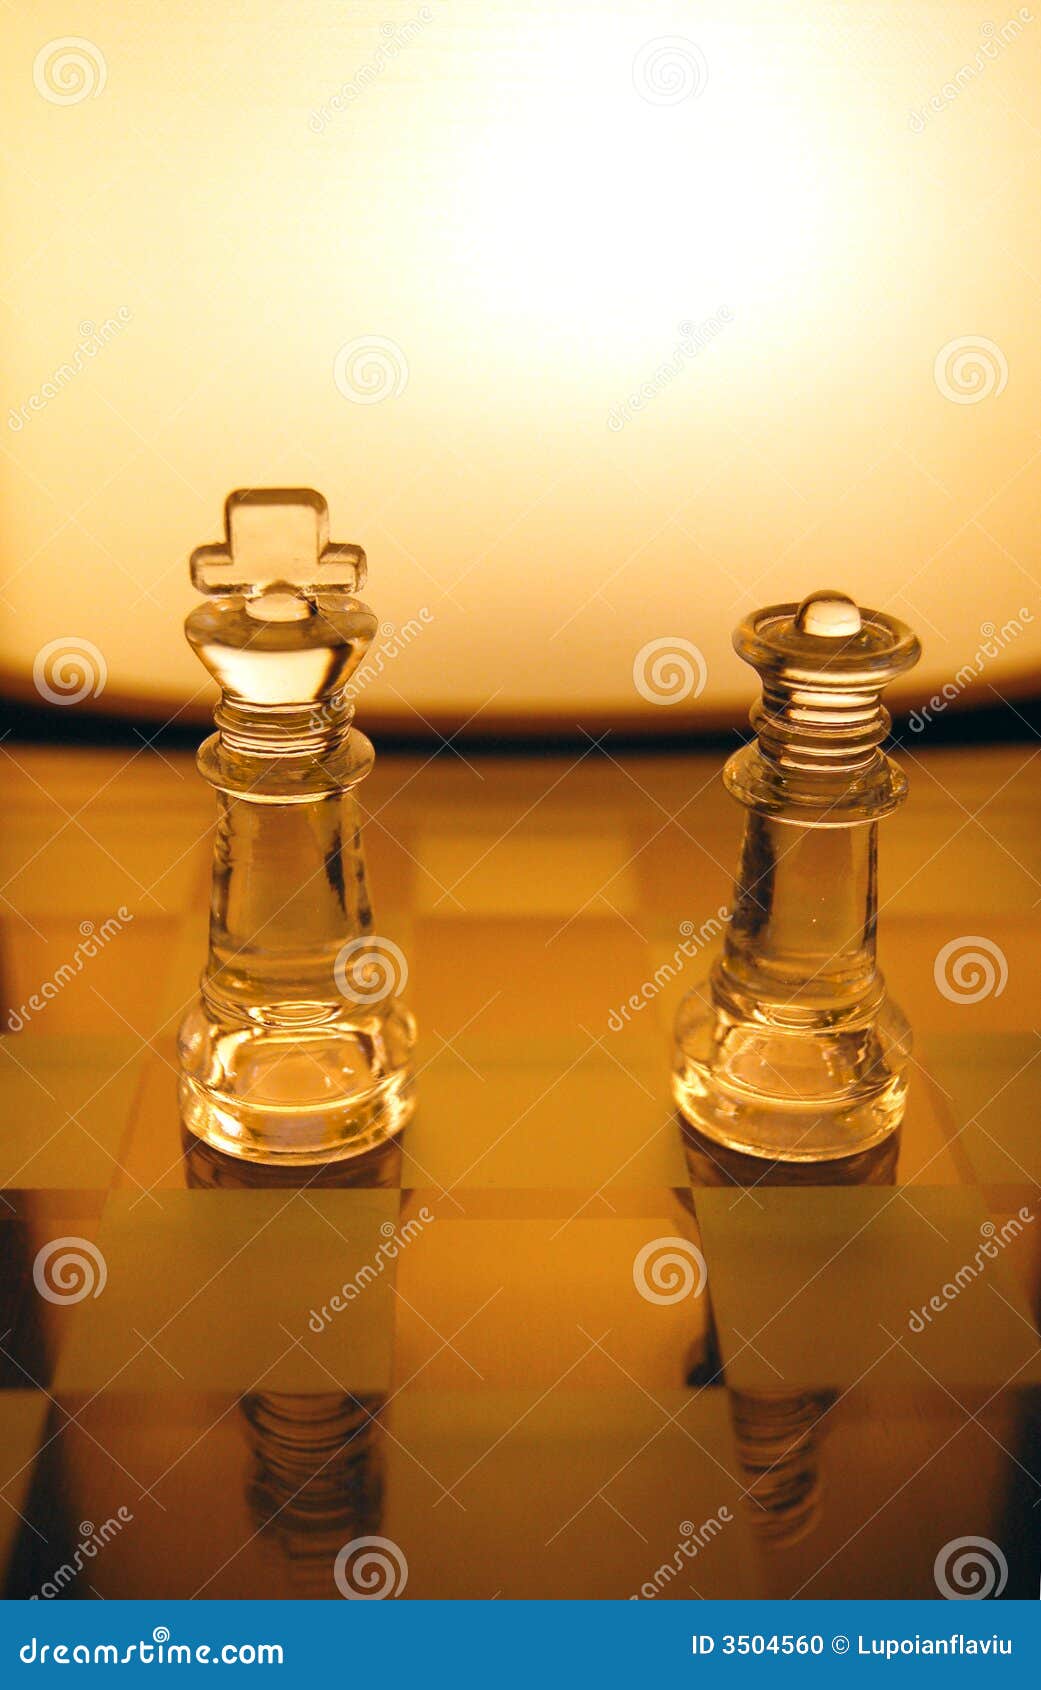 Boy Concentrating on His Next Chess Move Stock Image - Image of  concentration, glass: 295057